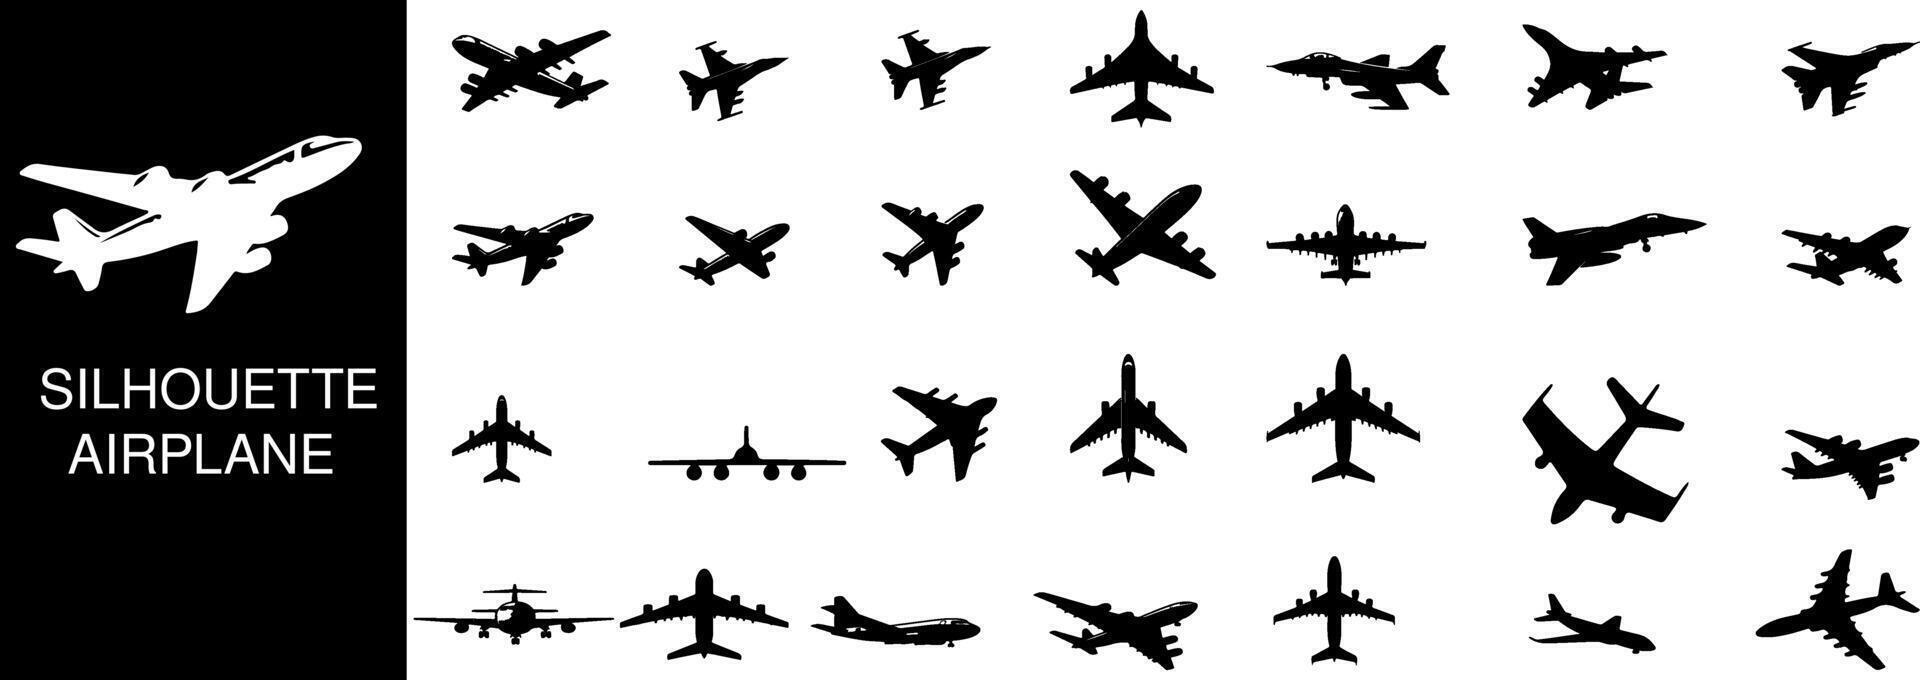 Airplane Silhouettes Collection, the ultimate gallery of airplane silhouettes vector